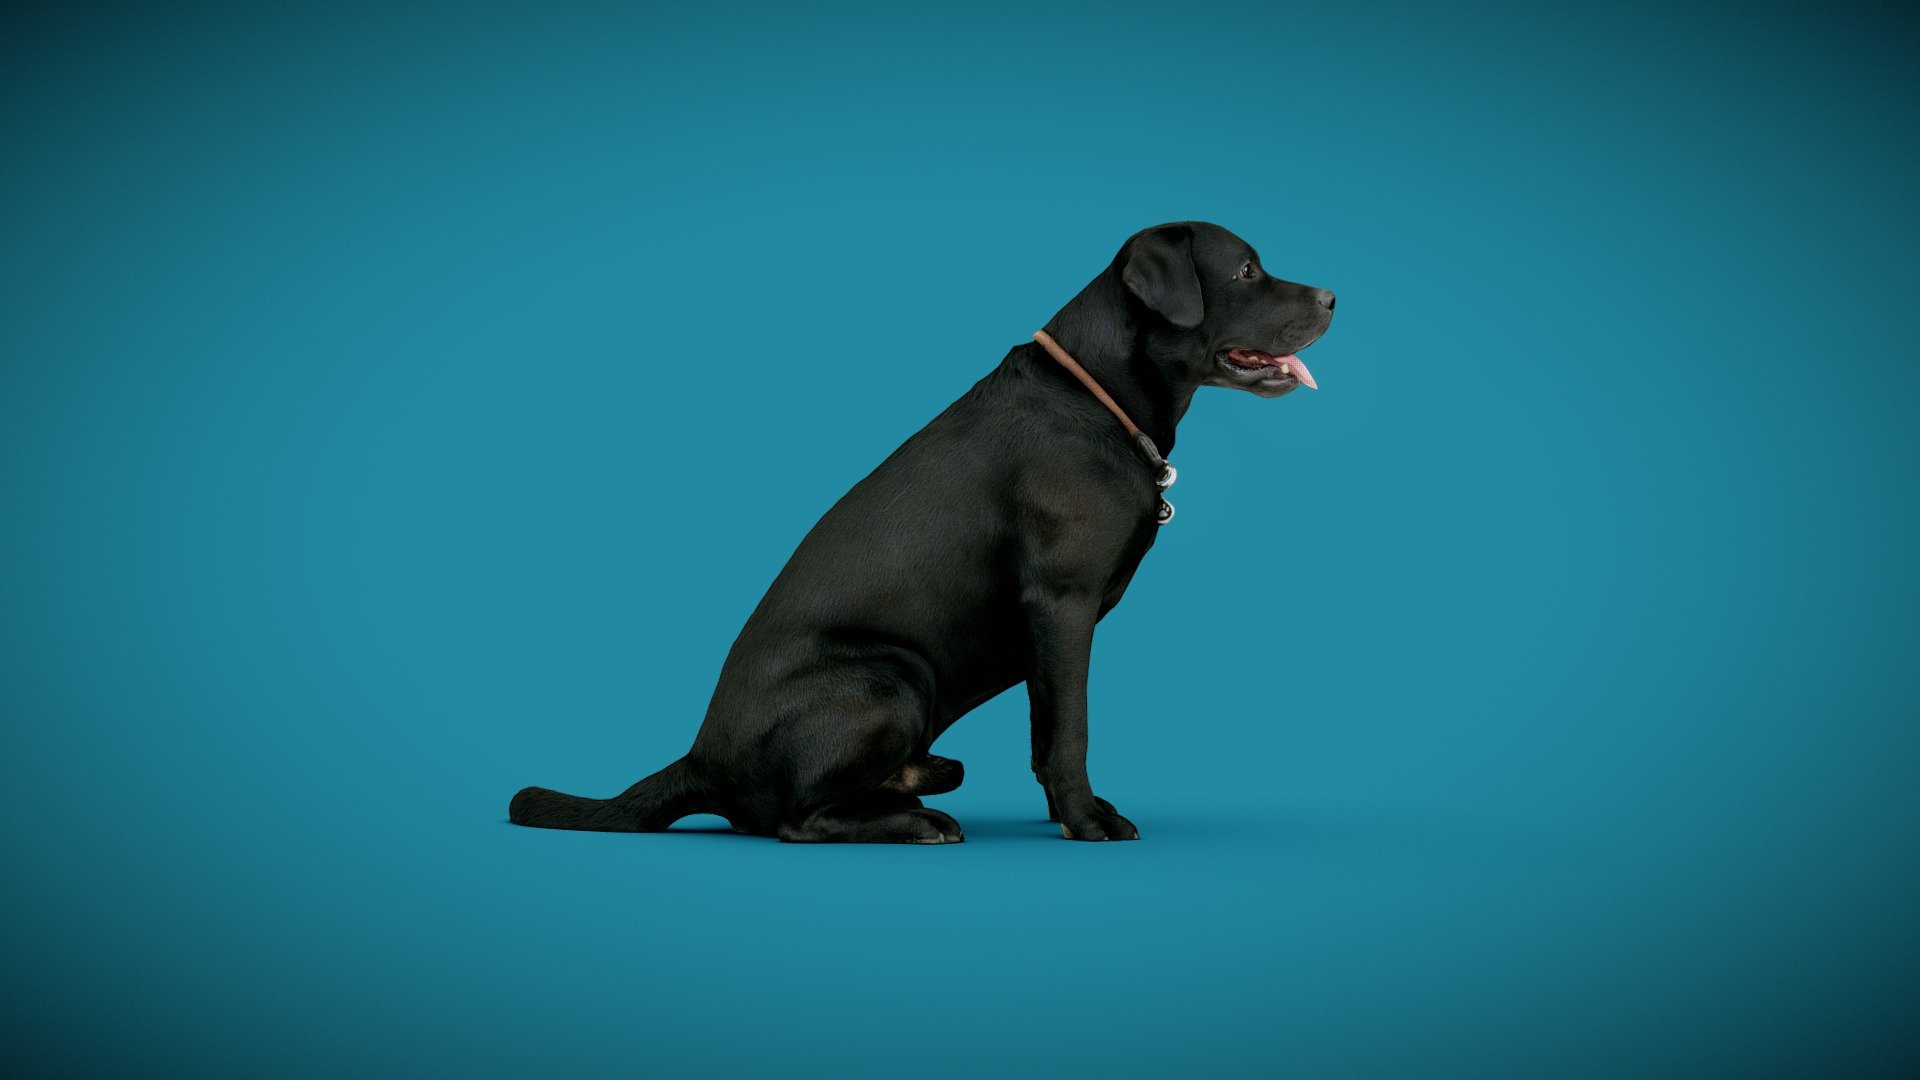 3d-dog-scan using photogrammetry technique // more poses and packages avaiable*




3D-Model approx. 50K triangles

4K DiffuseColorTexture

real scale

watertight

3d-ScanService: https://www.optimission.de

*
https://skfb.ly/o8q9P
https://skfb.ly/o8q9Q
https://skfb.ly/o8q9S - DOG A - 2of6 - Buy Royalty Free 3D model by Frank.Zwick (@Frank_Zwick) 3d model